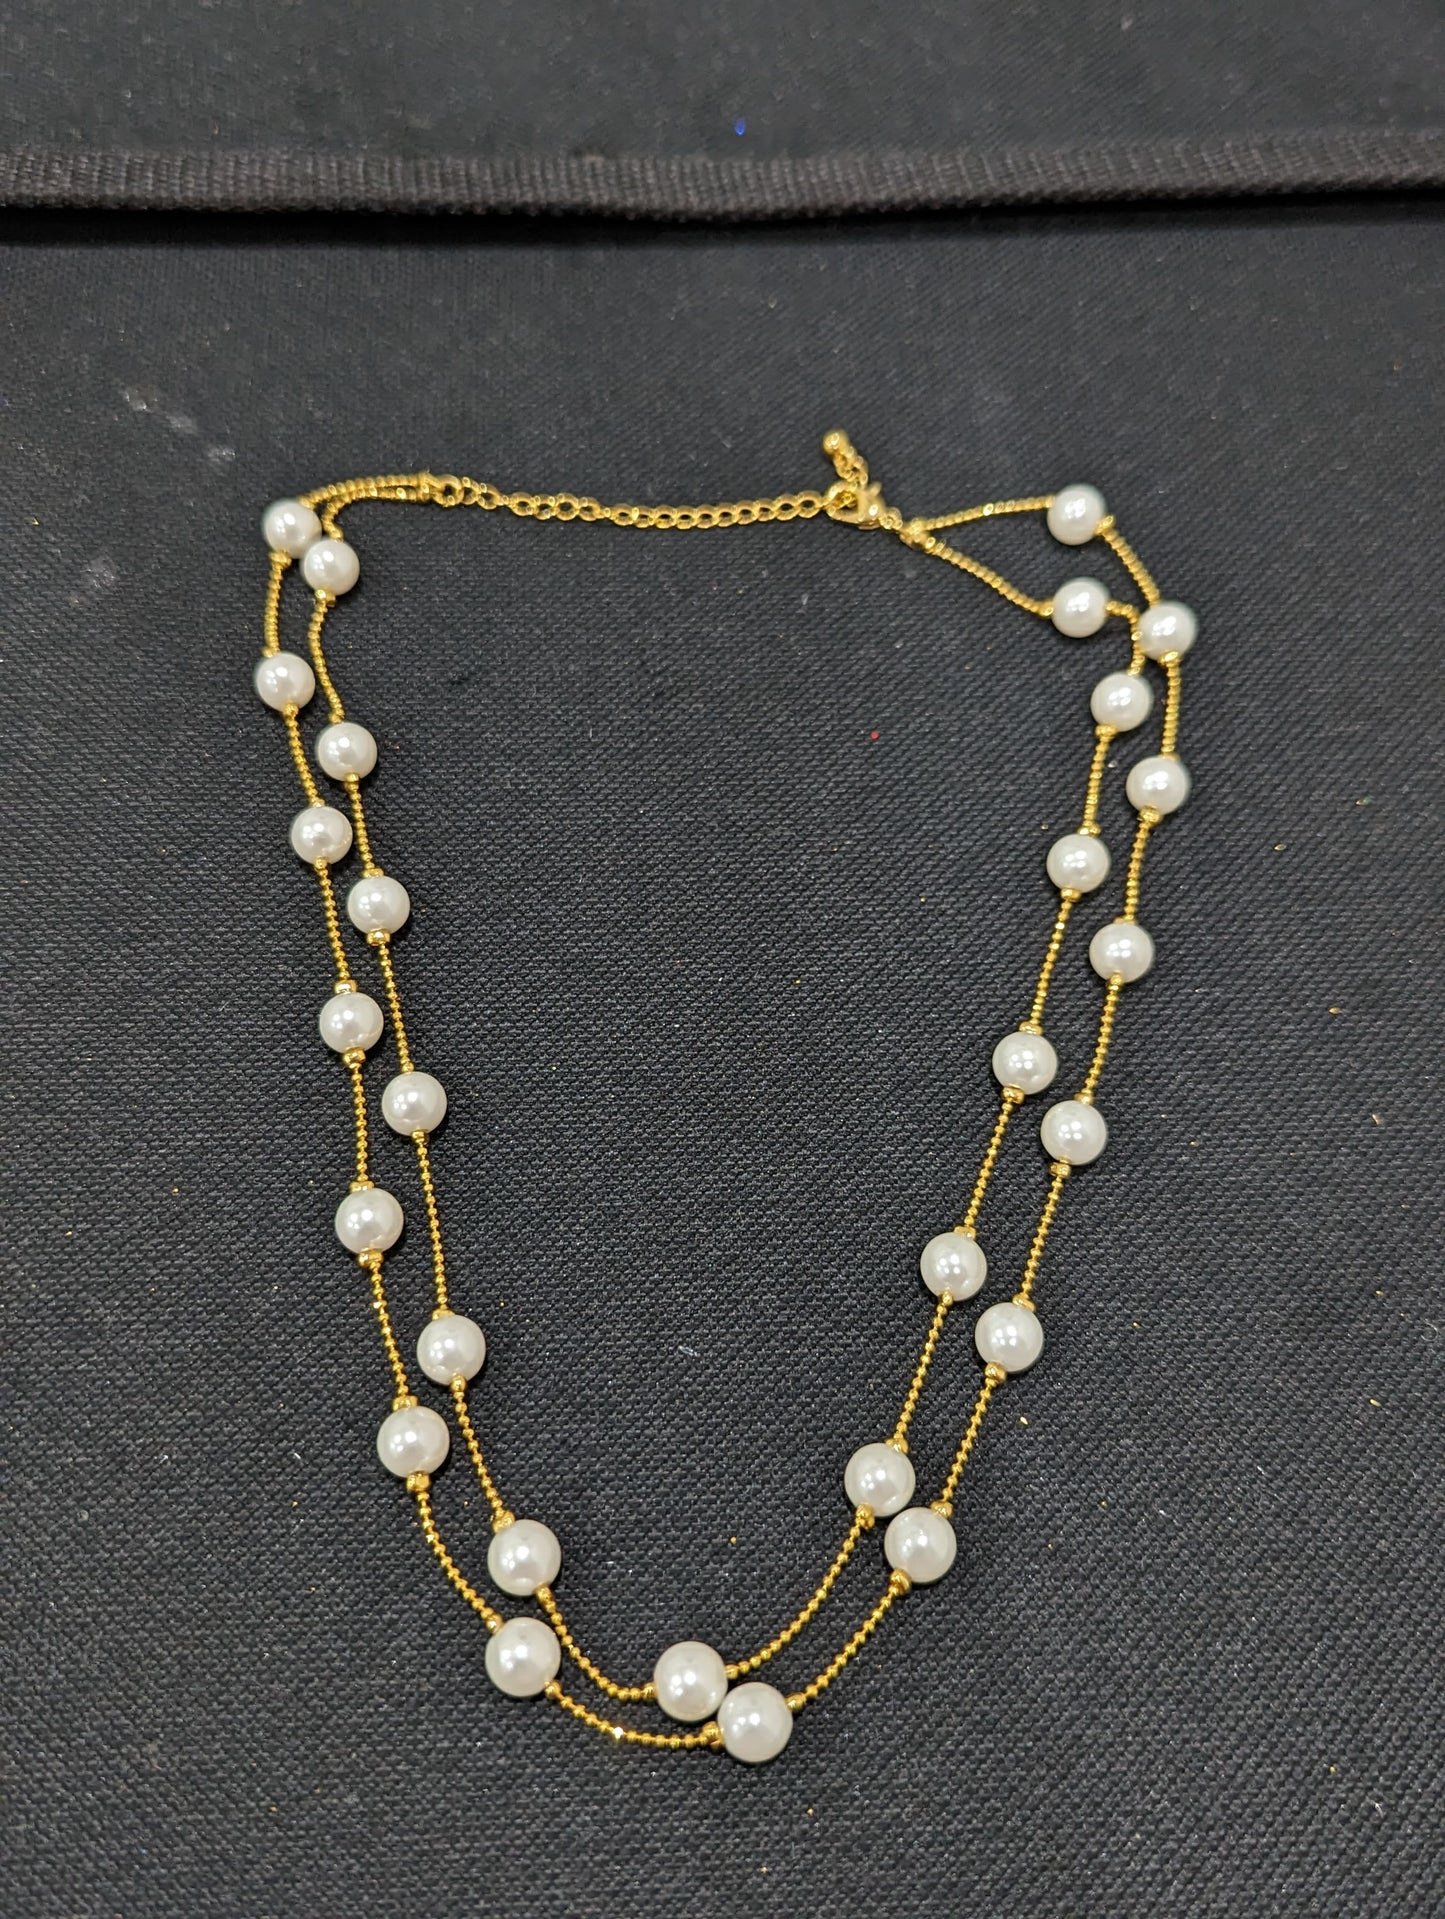 Dual stranded pearl bead Choker chain necklace